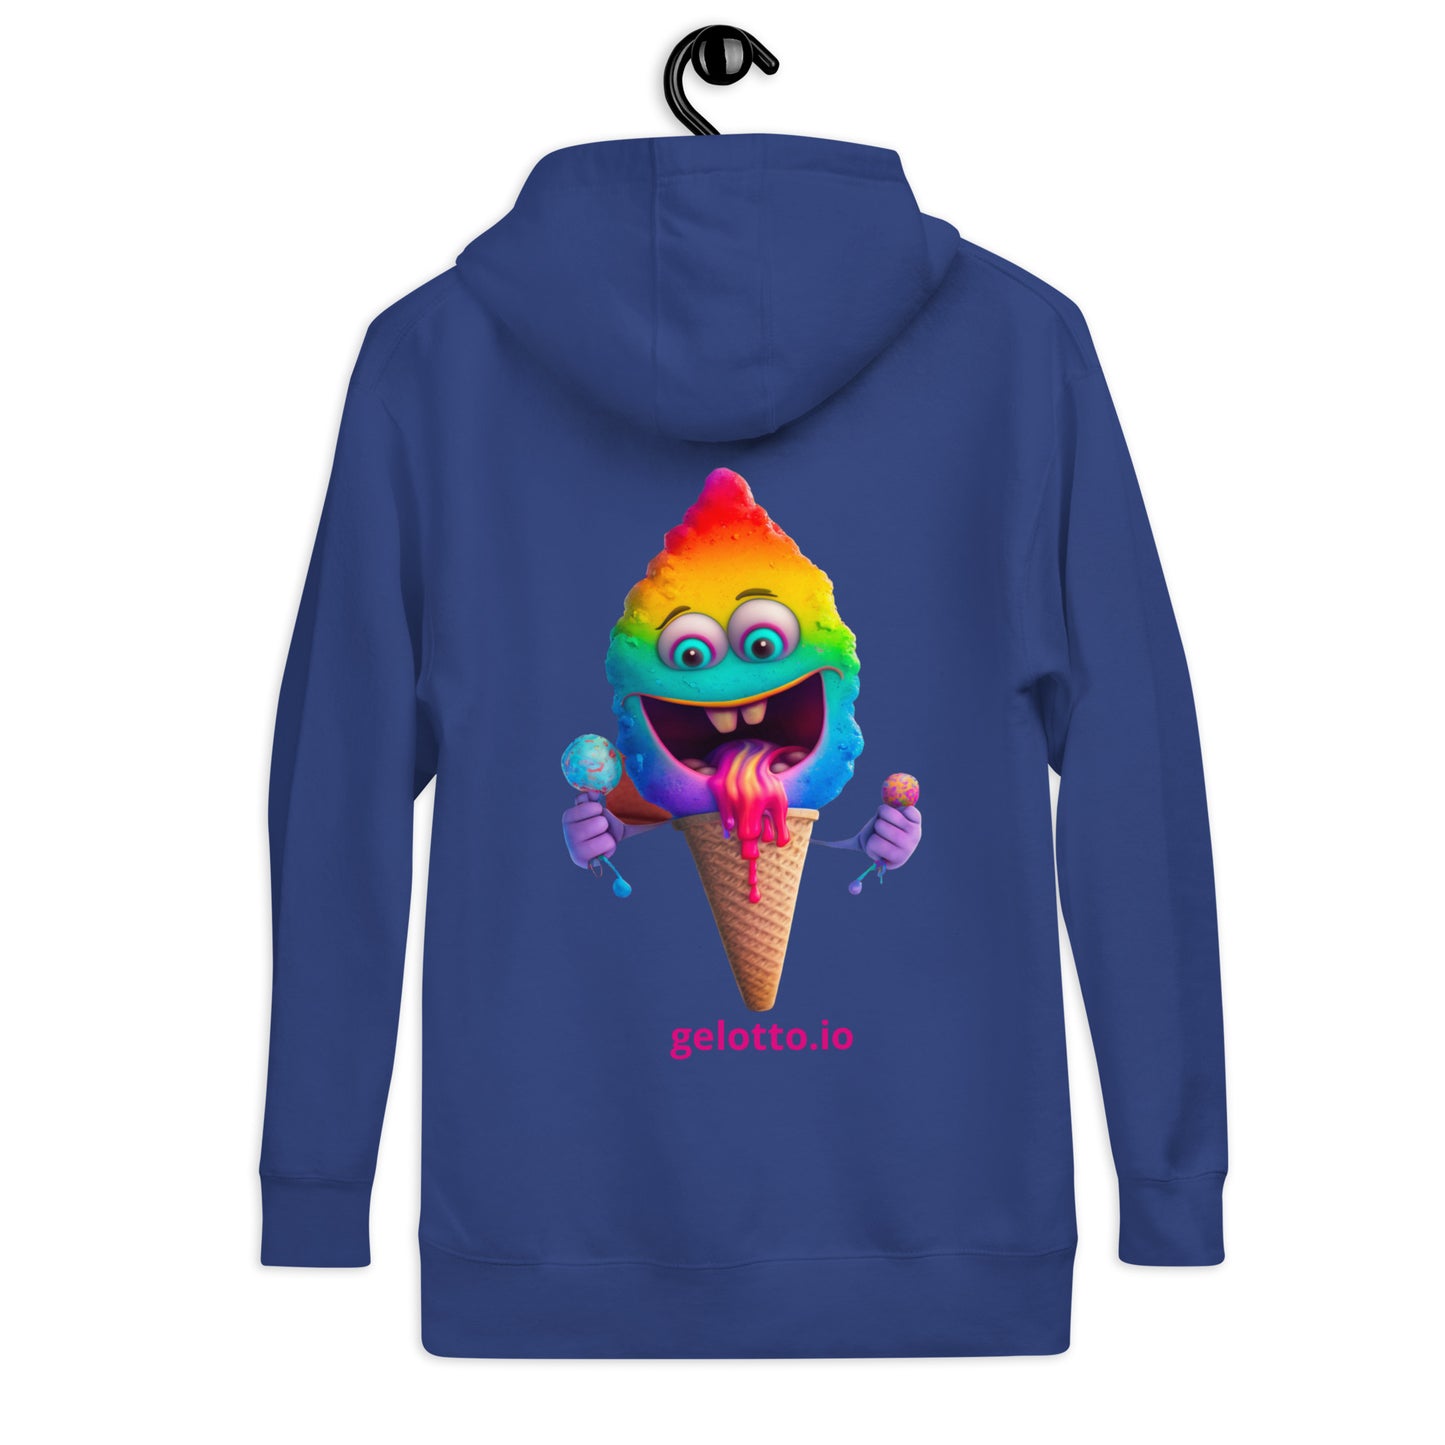 Unisex Hoodie Rainbow Mostro on back, Gold G on front